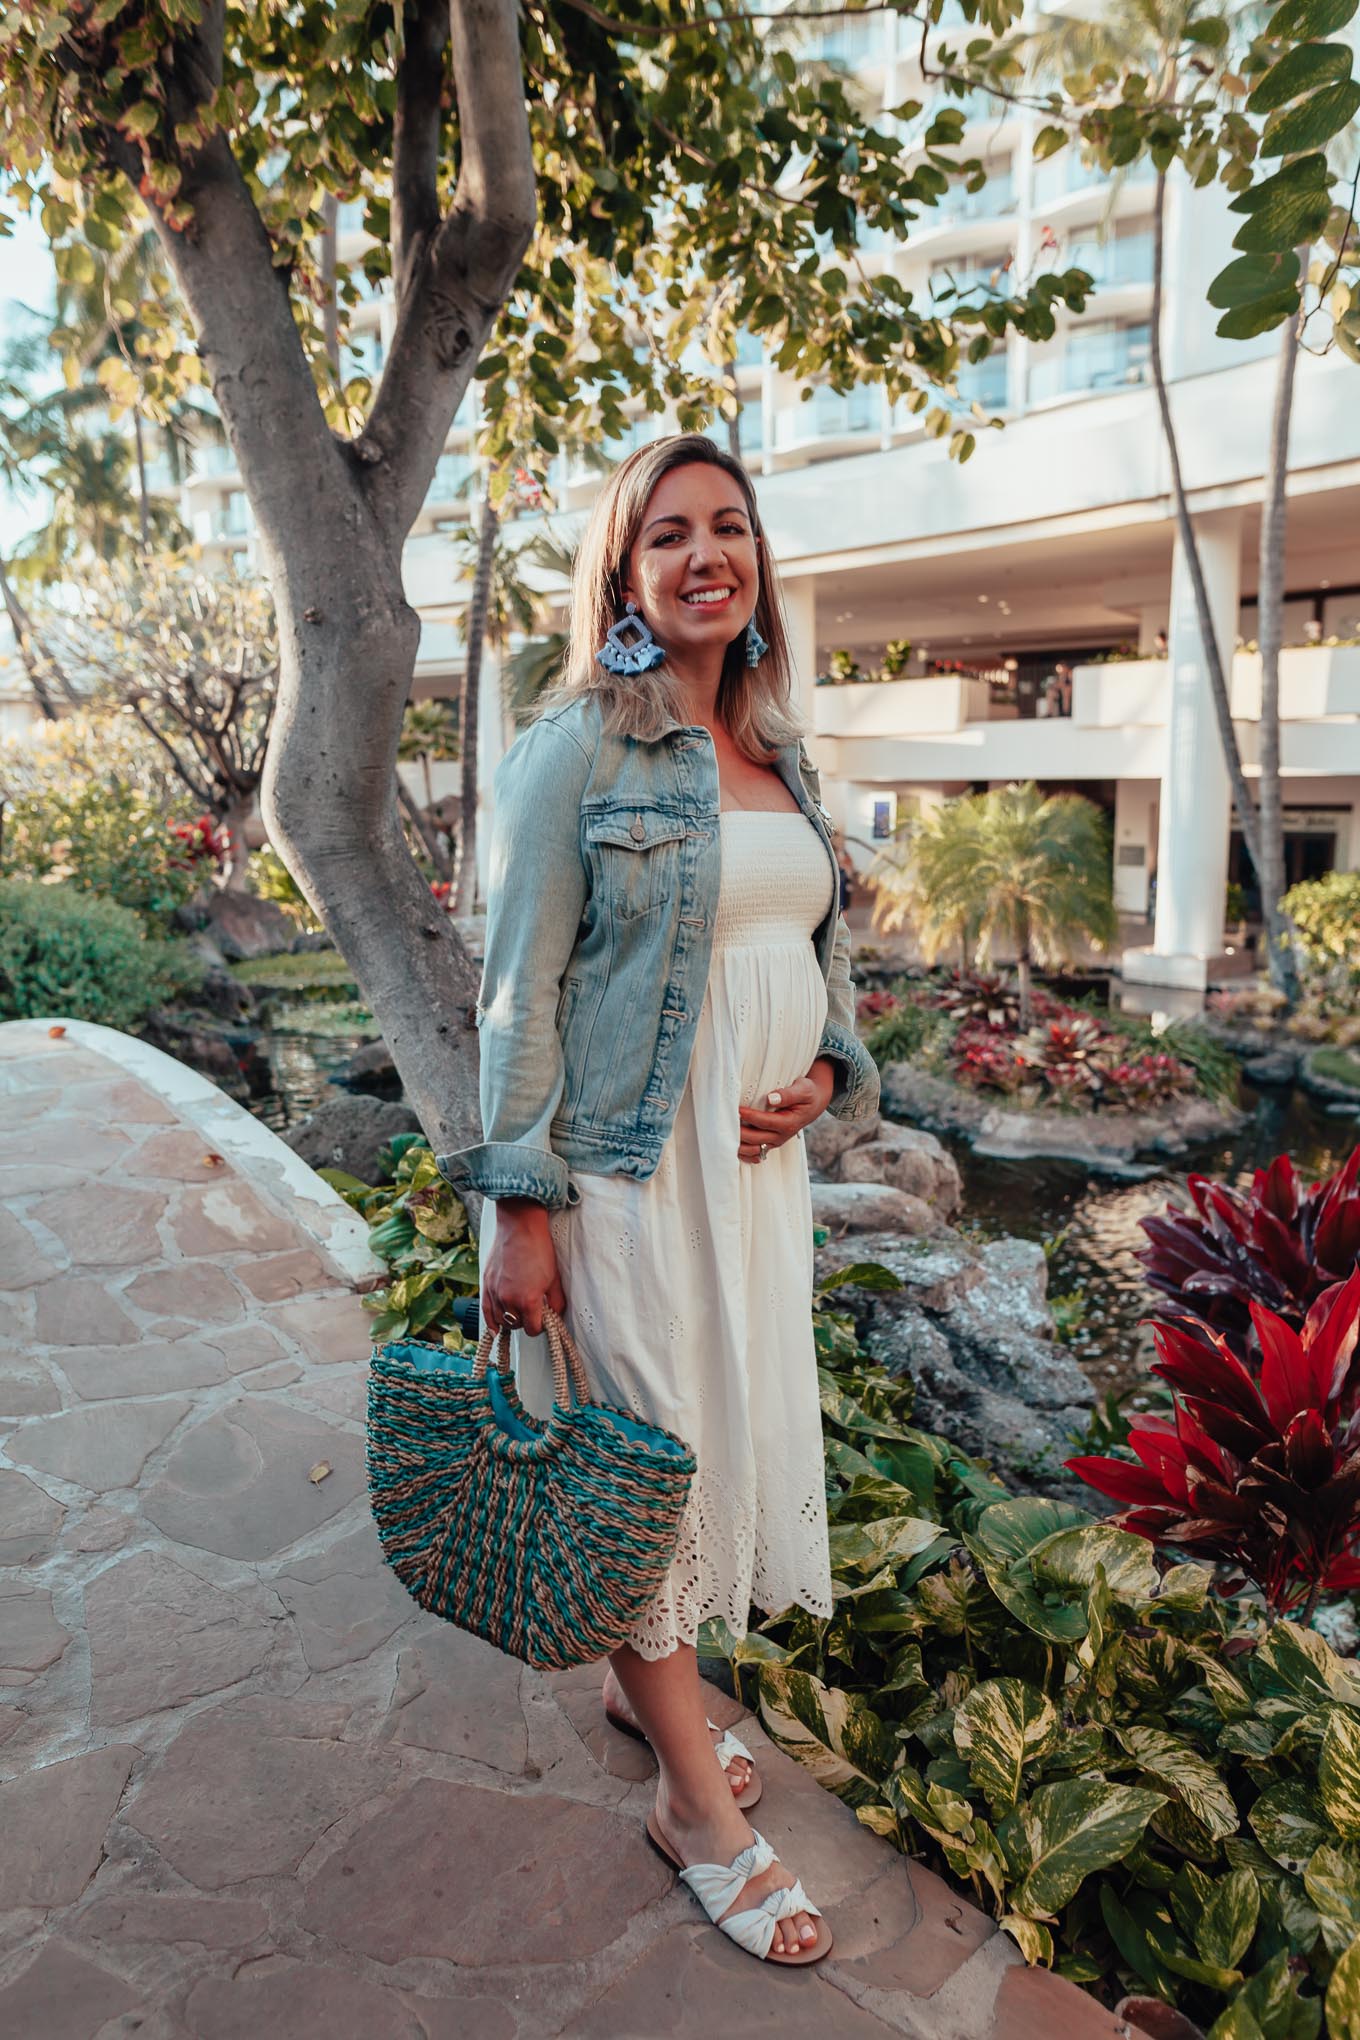 Shopbop sale maternity favorites featured by top US fashion blog, Glass of Glam: image of a woman wearing an Ingrid & Isabel dress, Splendid flat sandals, Old Navy denim jacket, and BAUBLEBAR statement earrings